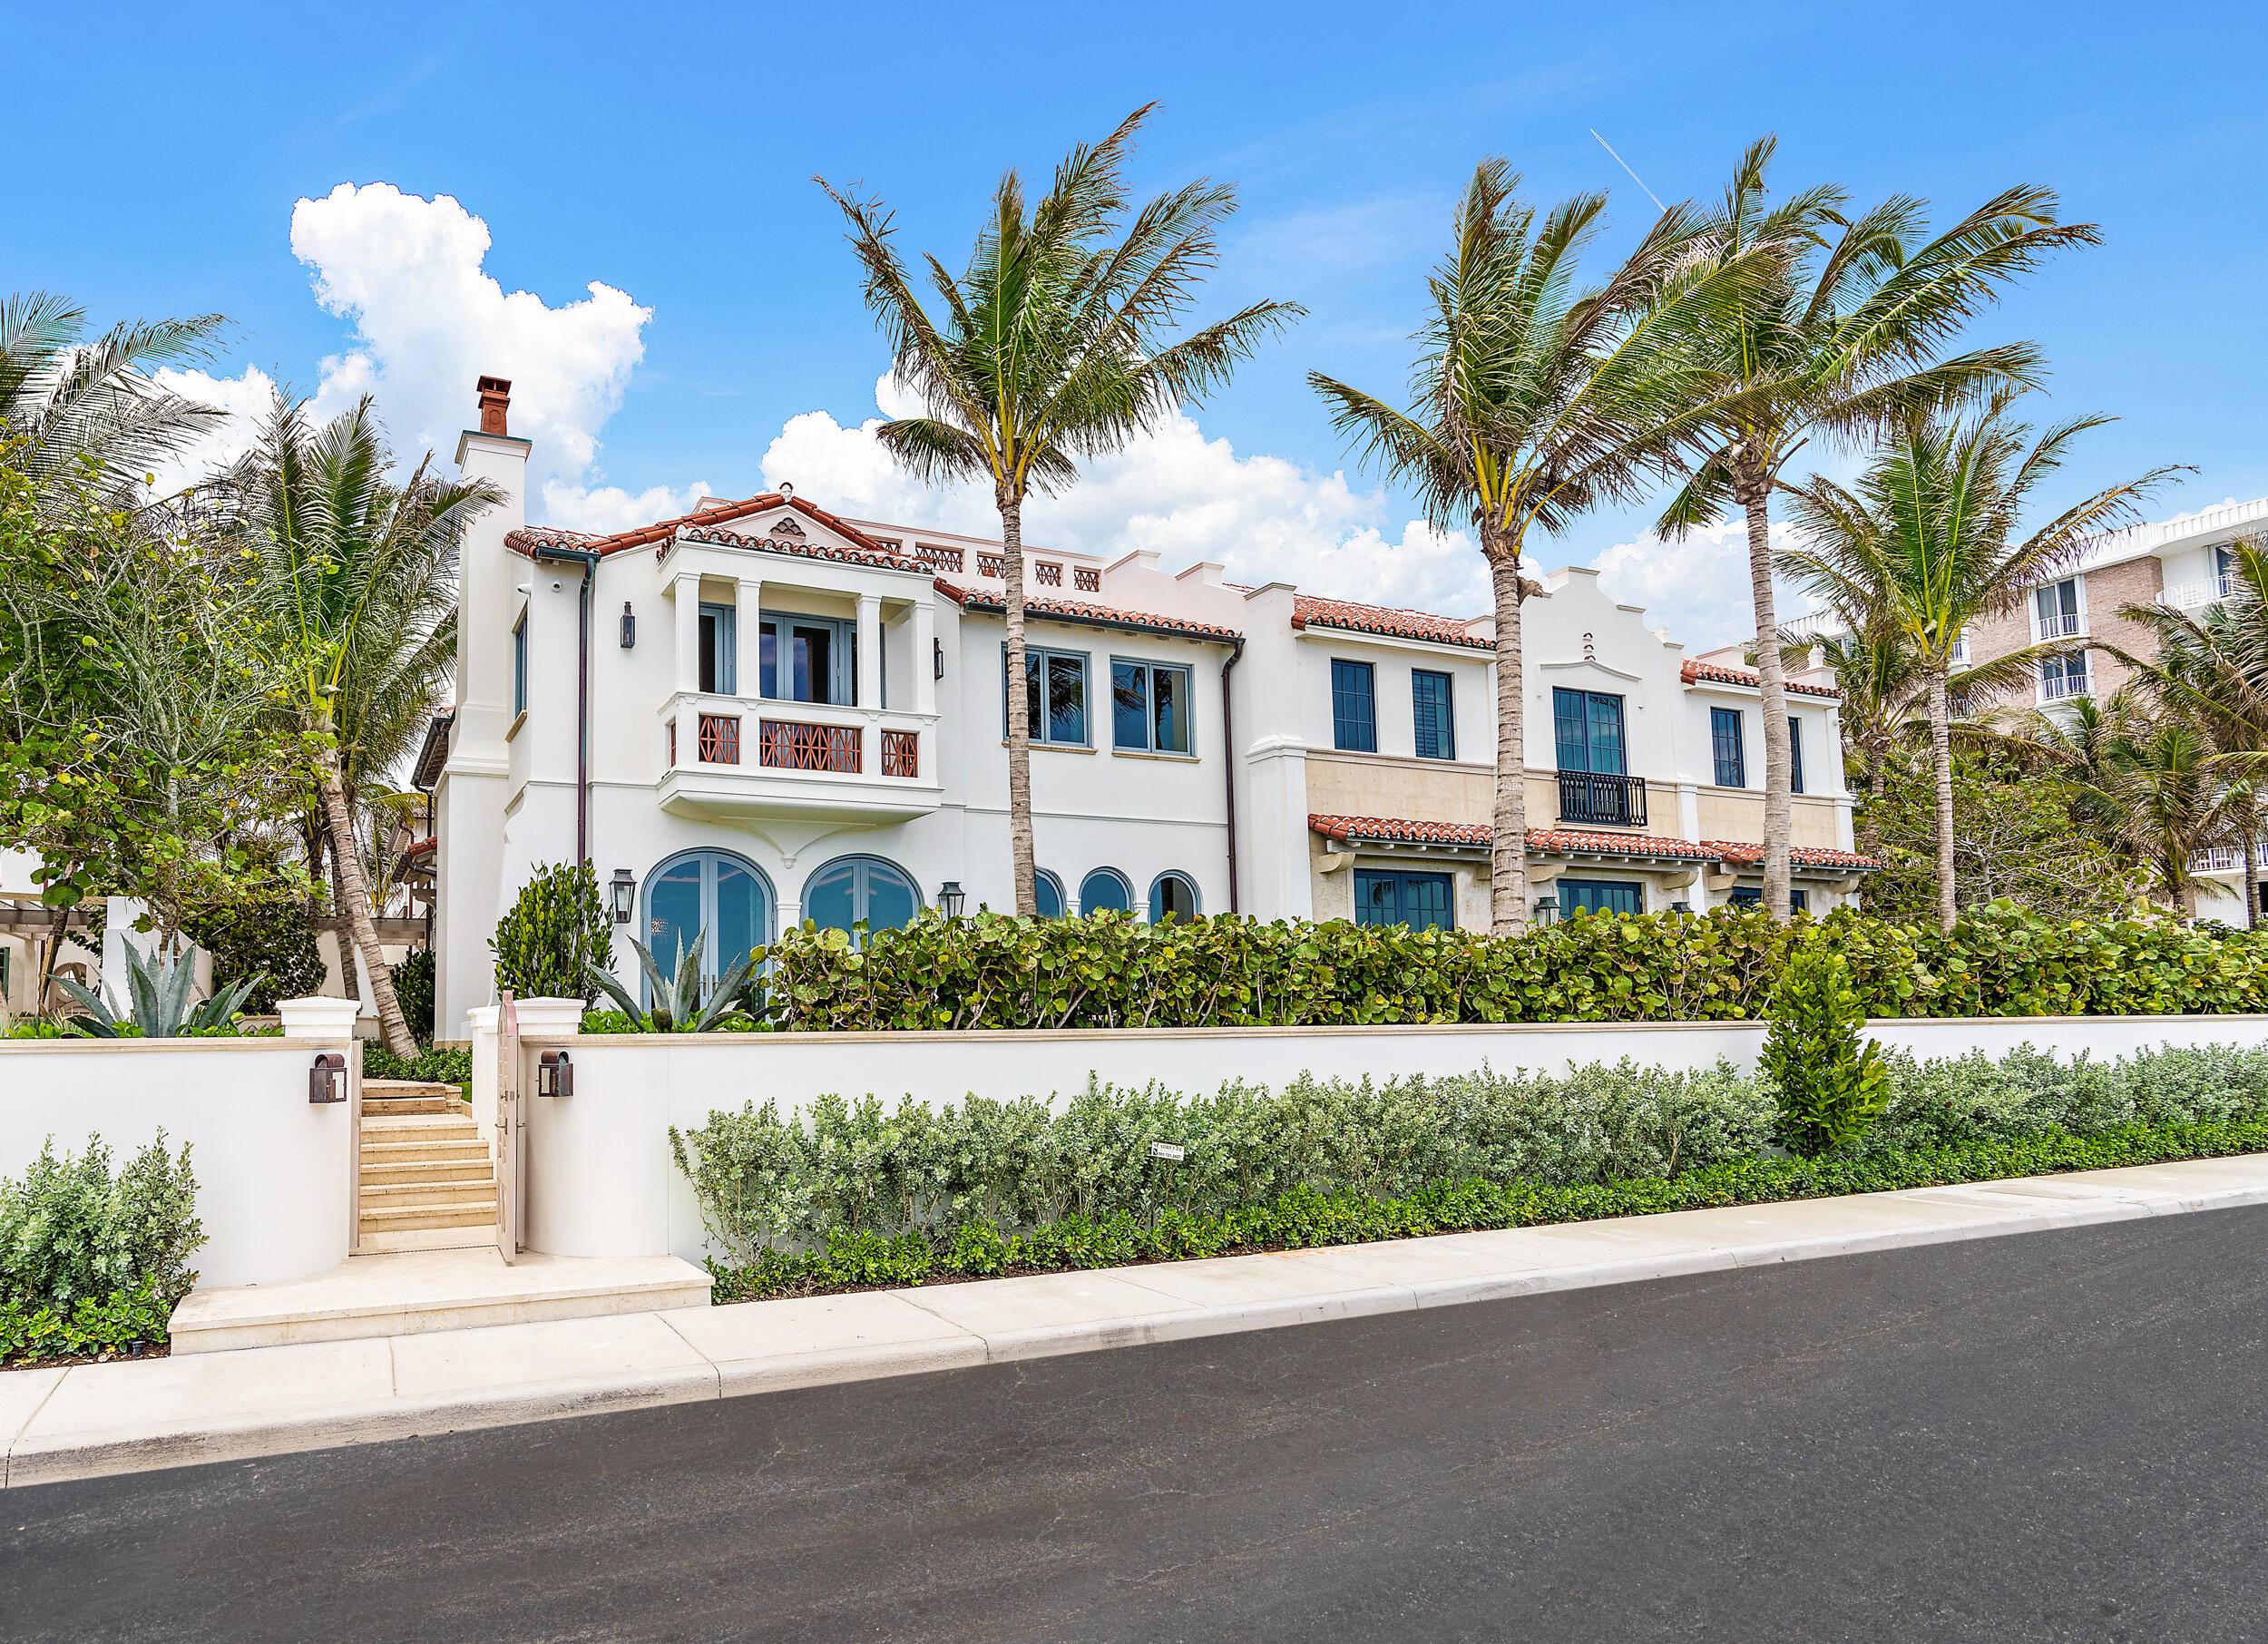 Located in the heart of Palm Beach, 1 block south of Worth Avenue in the prestigious Estate Section.